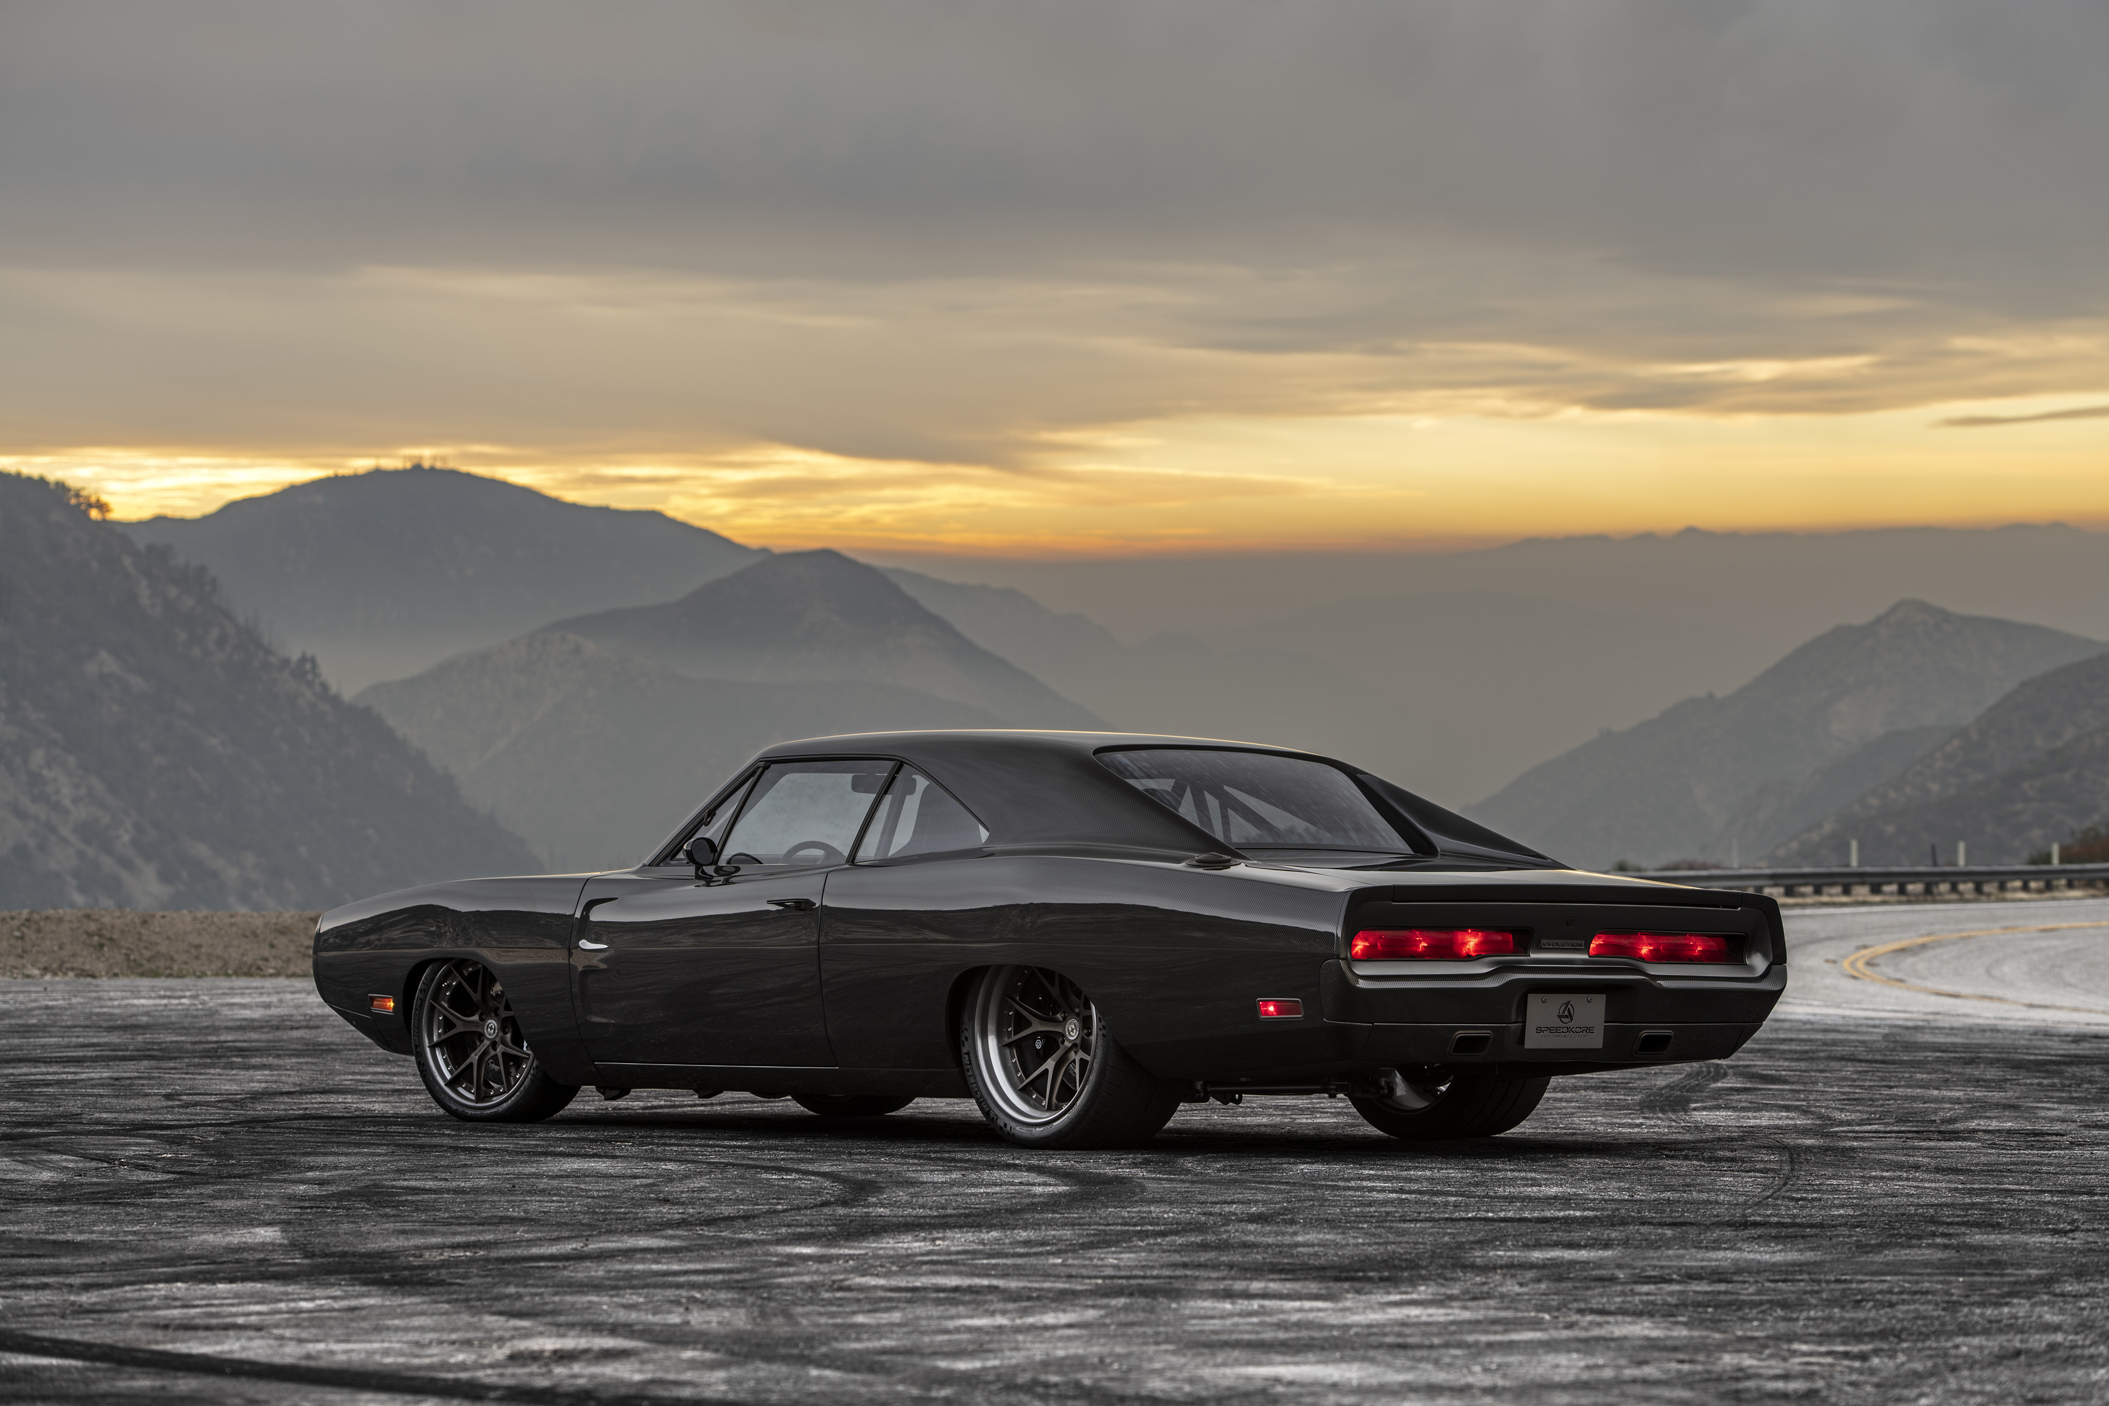 Speedkore carbon fiber Dodge Charger Photo Gallery